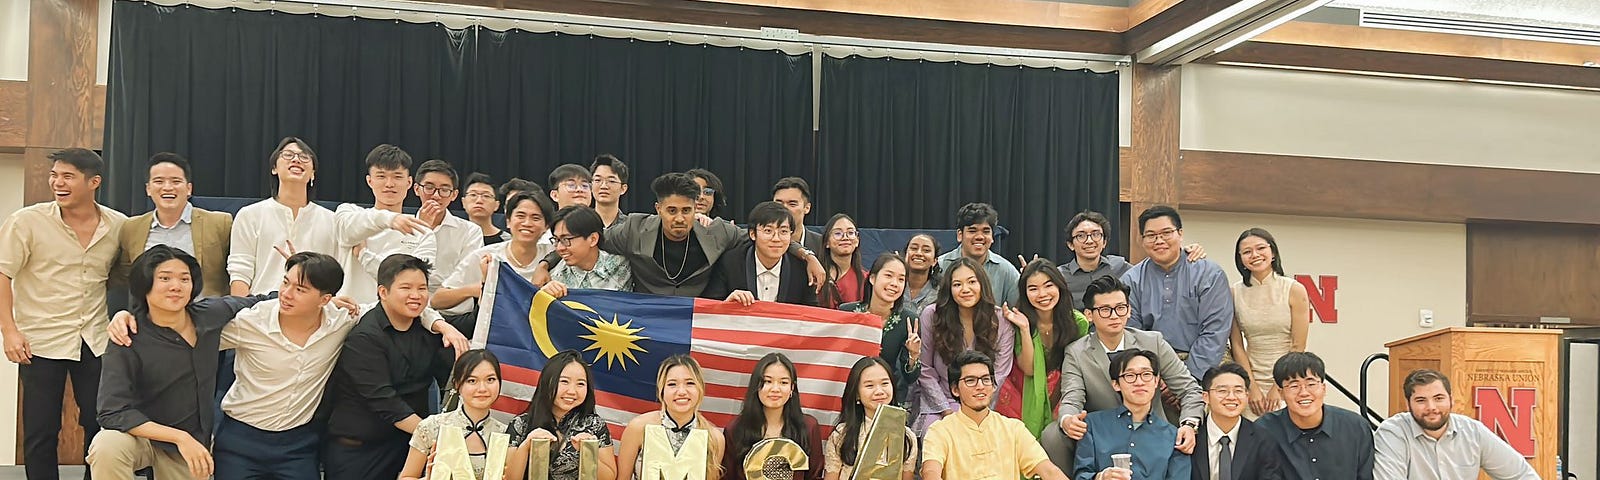 NUMSA group picture in Malaysian Night’23